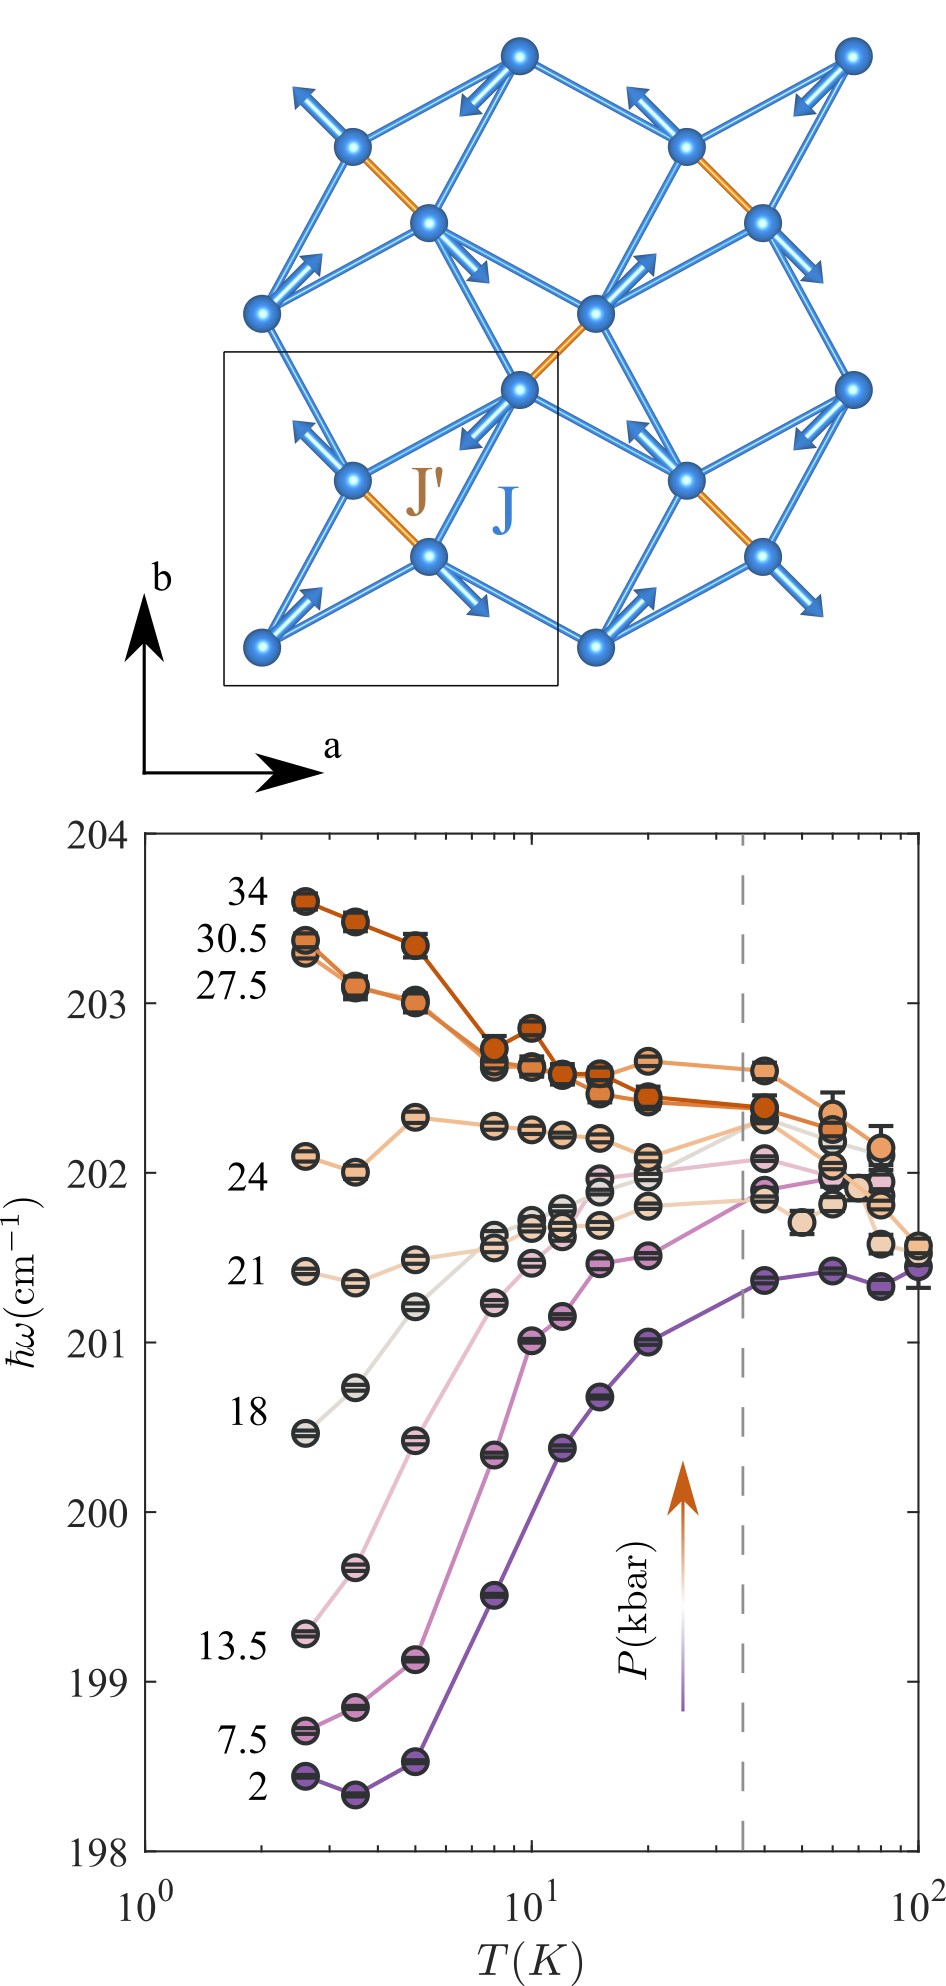 Enlarged view: Top: Lattice of orthogonal dimers in SrCu<sub>2</sub>(BO<sub>3</sub>)<sub>2</sub> showing the atomic motions of the pantograph mode. Bottom: Measured anomalous temperature dependence of the pantograph mode frequency revealing a pressure-driven change in the magnetic bond energy [1].